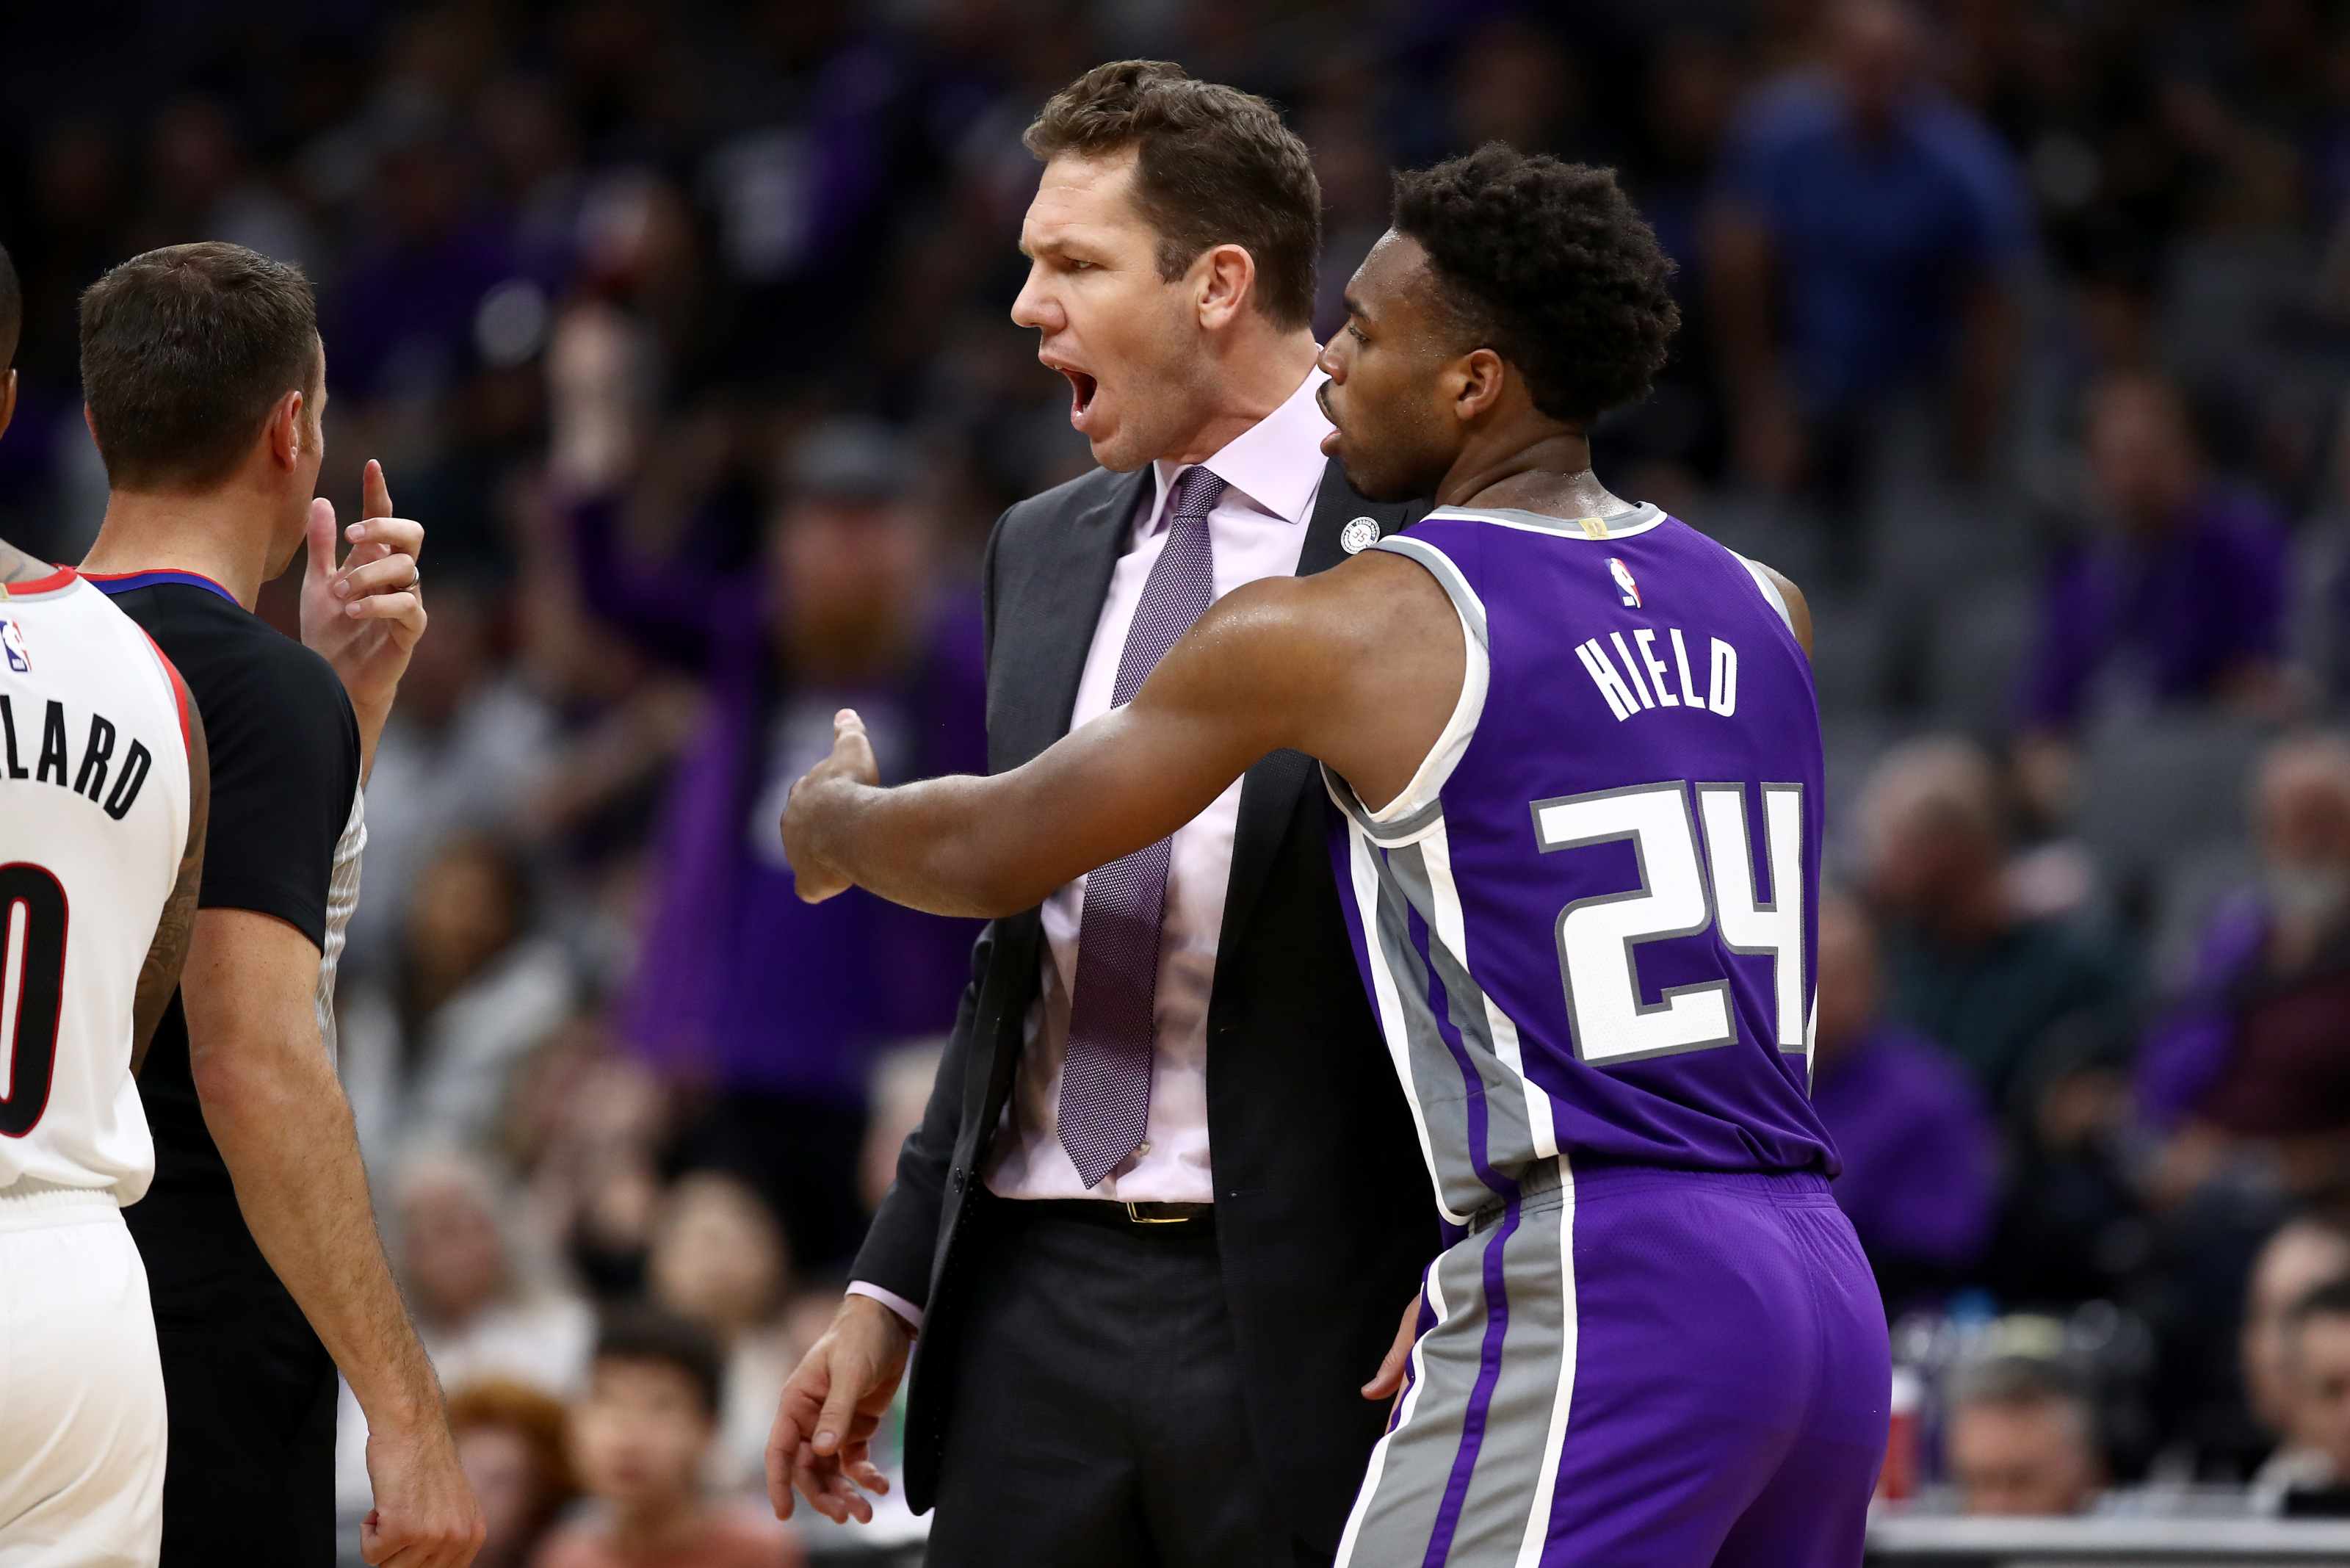 Buddy Hield records fastest three-pointer in NBA history - Sactown Sports